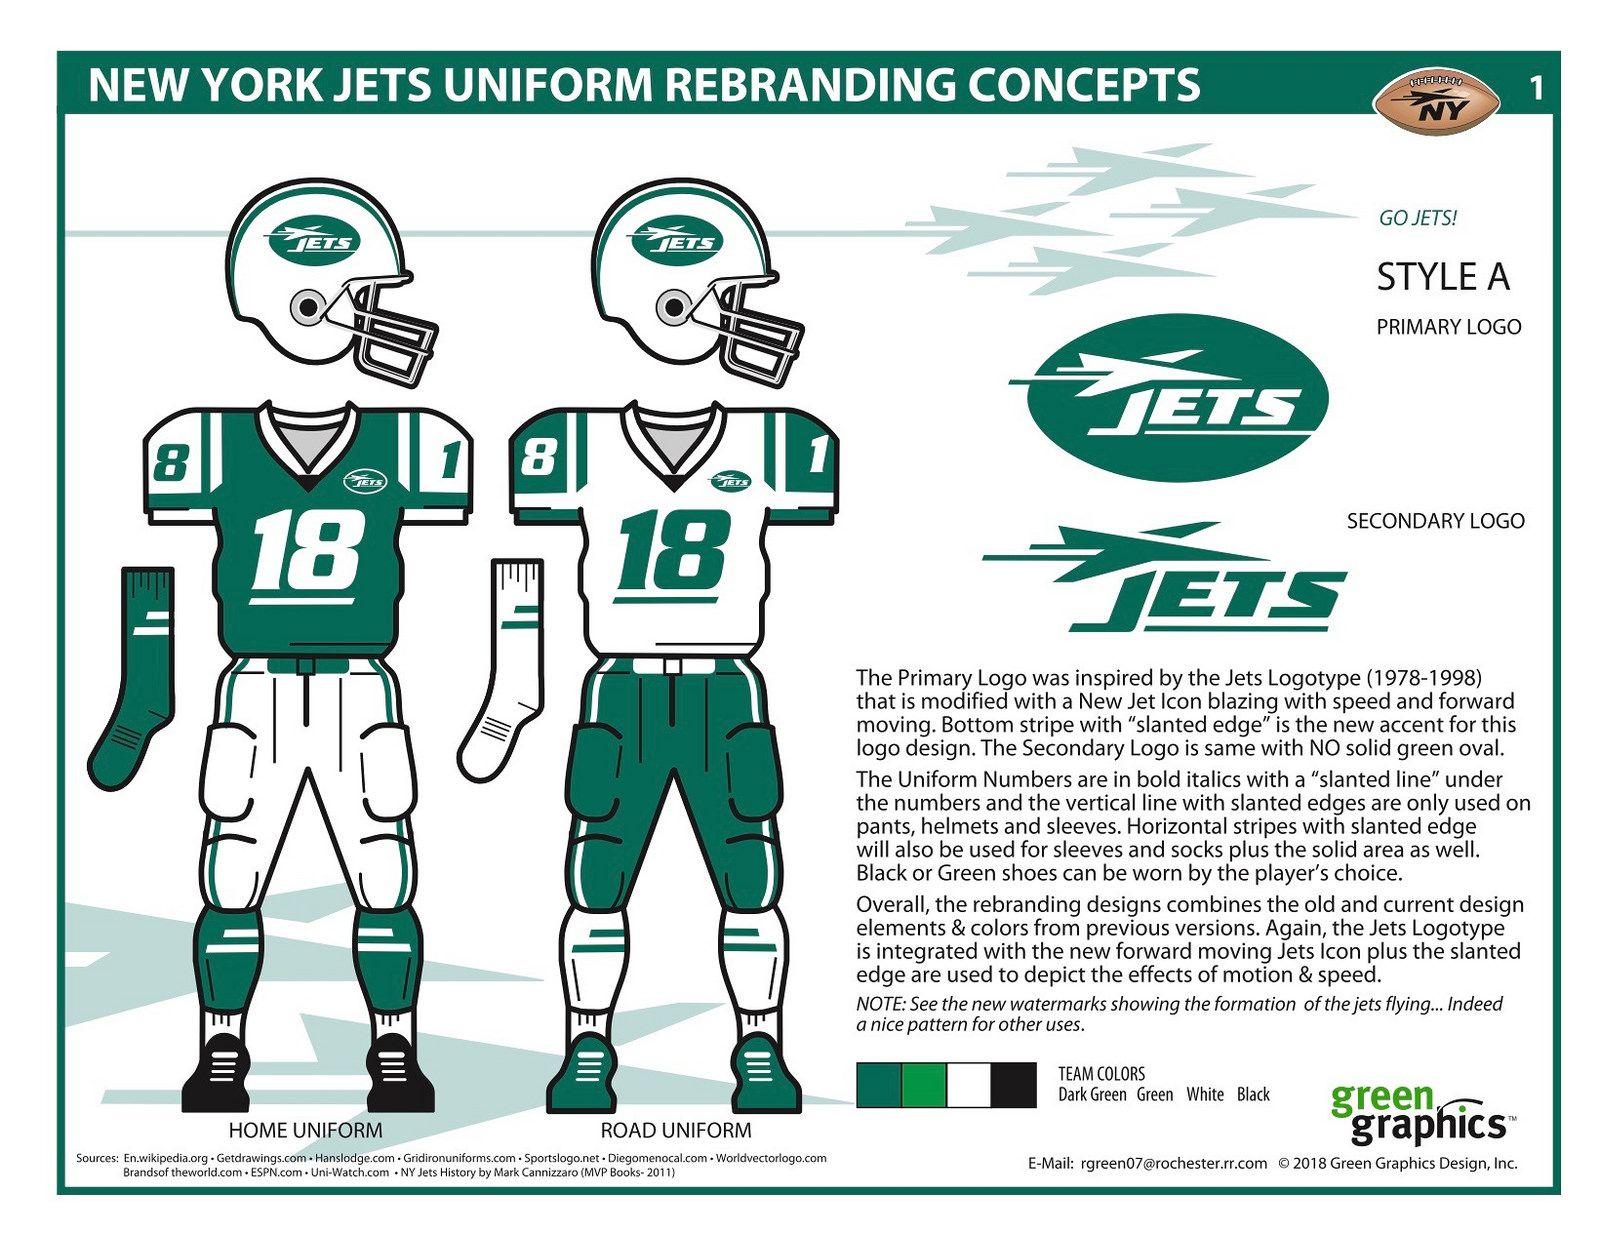 Best NY Jets Logo - Uni Watch delivers the winning entries for the New York Jets ...